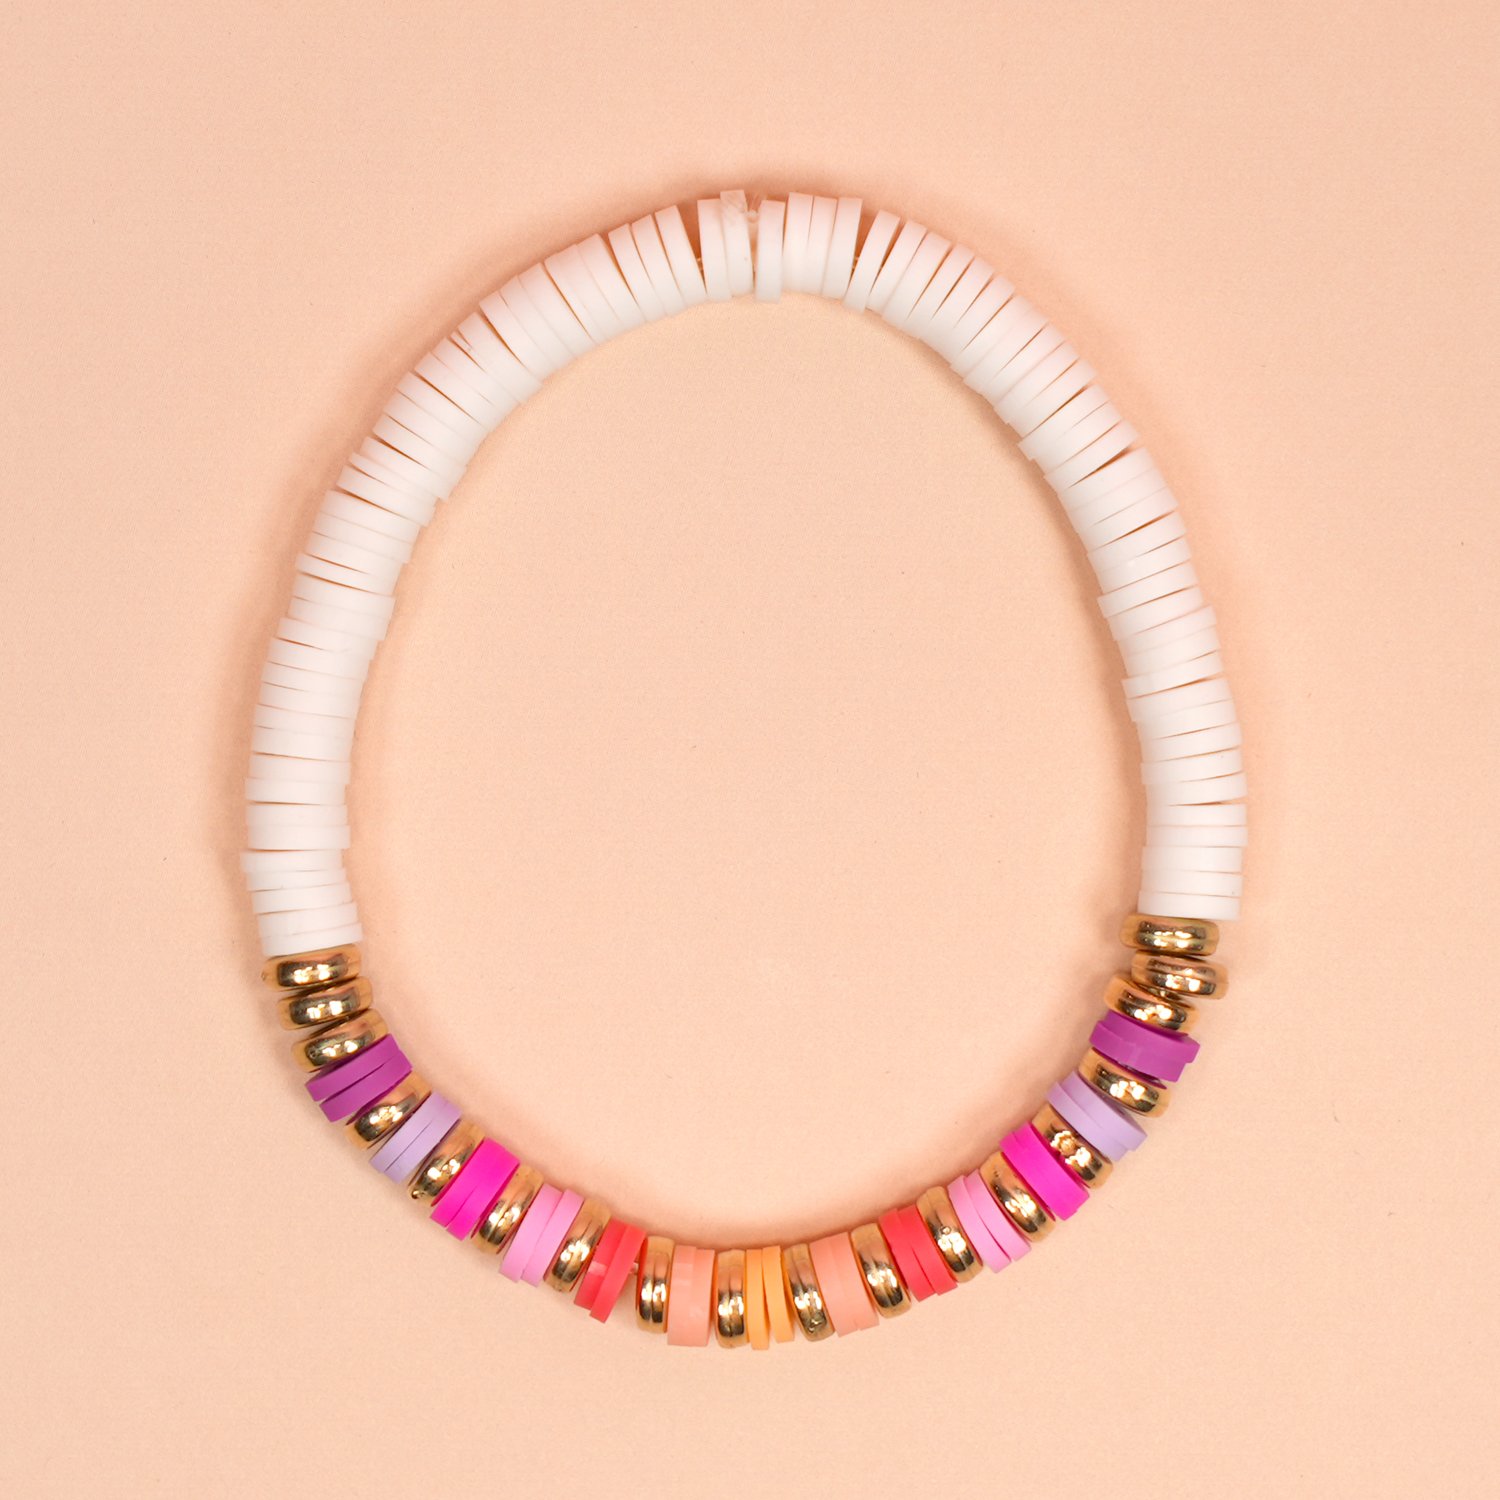 White clay bead bracelet with colorful bead and gold disc accents on peach background